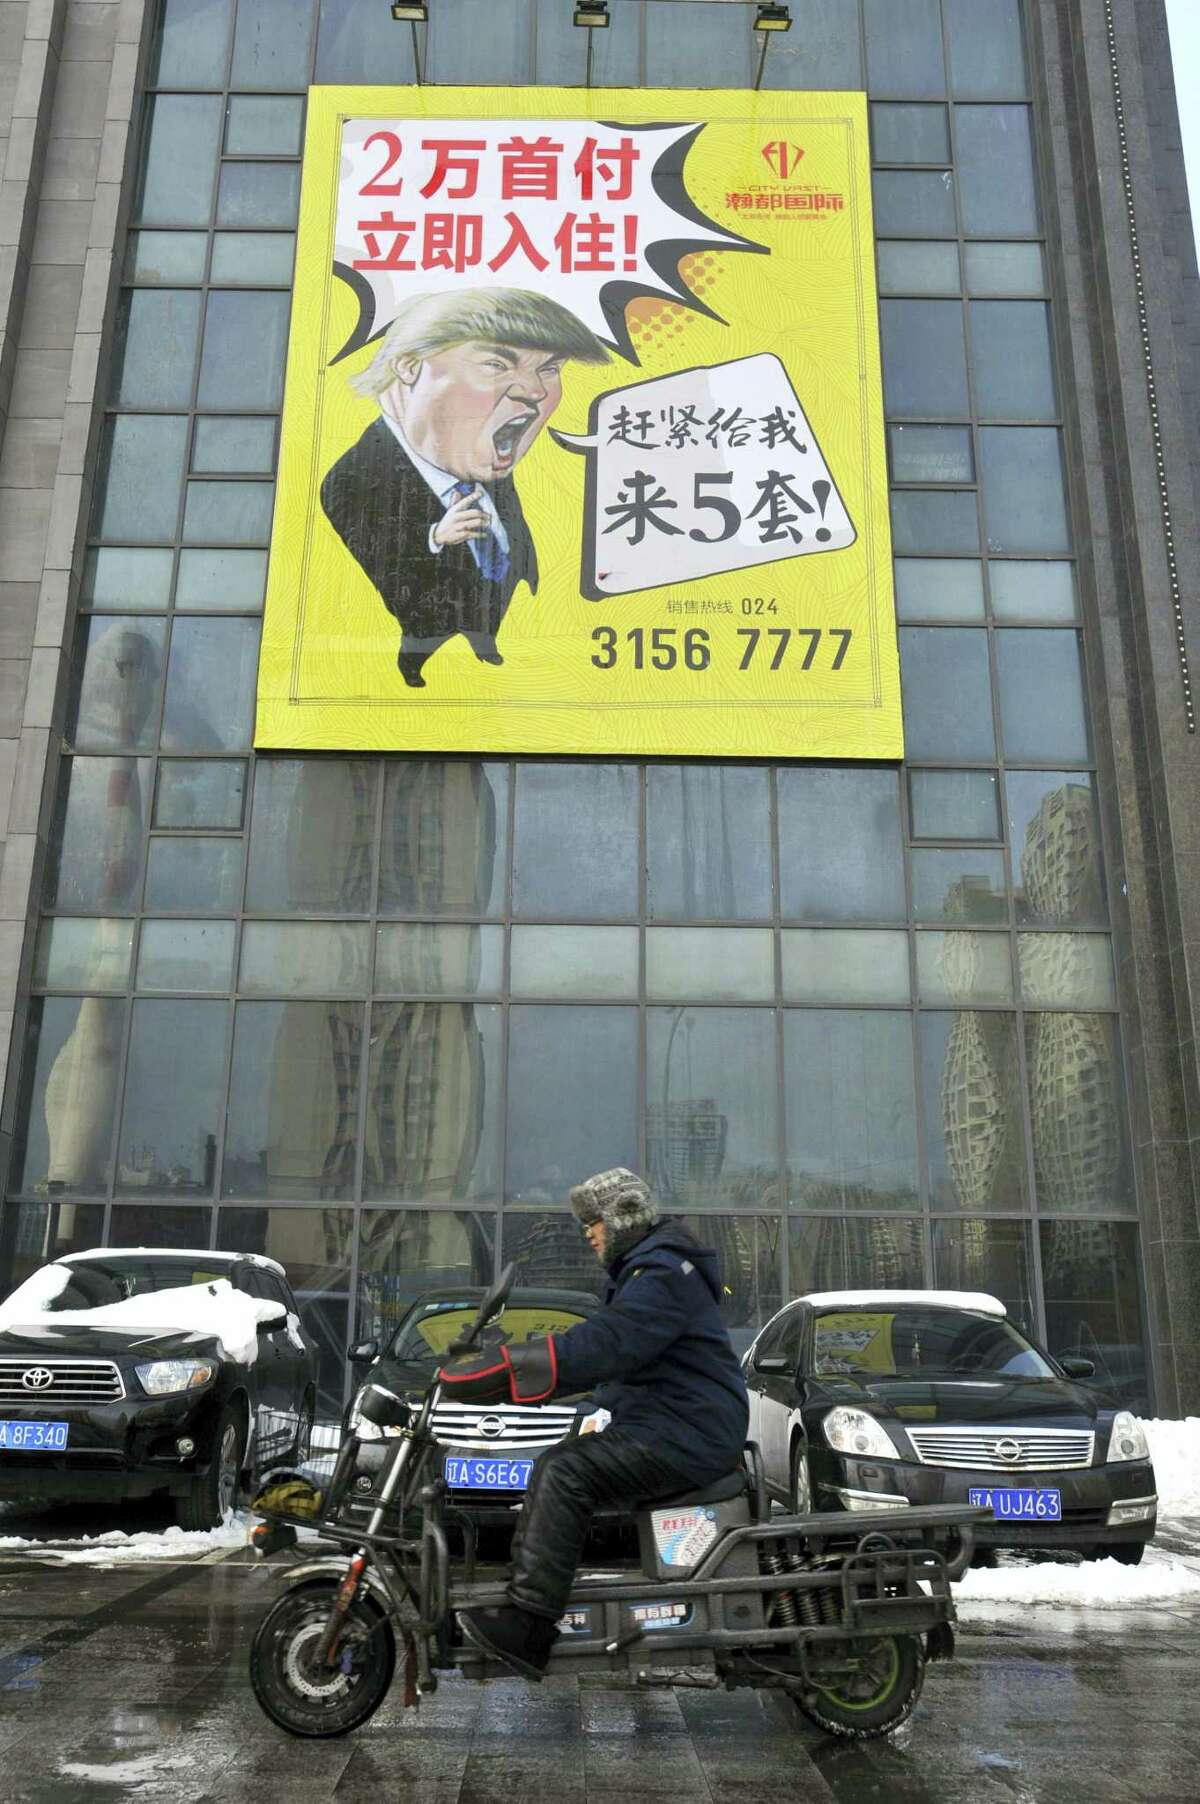 A motorcyclist drives past a real estate advertisement featuring a cartoon figure resembling U.S. President Donald Trump in Shenyang in northeastern China’s Liaoning province Wednesday, Feb. 22, 2017. After years of legal wrangling, China’s government awarded Trump’s business valuable rights to his own name last week, in the form of a 10-year trademark for construction services.